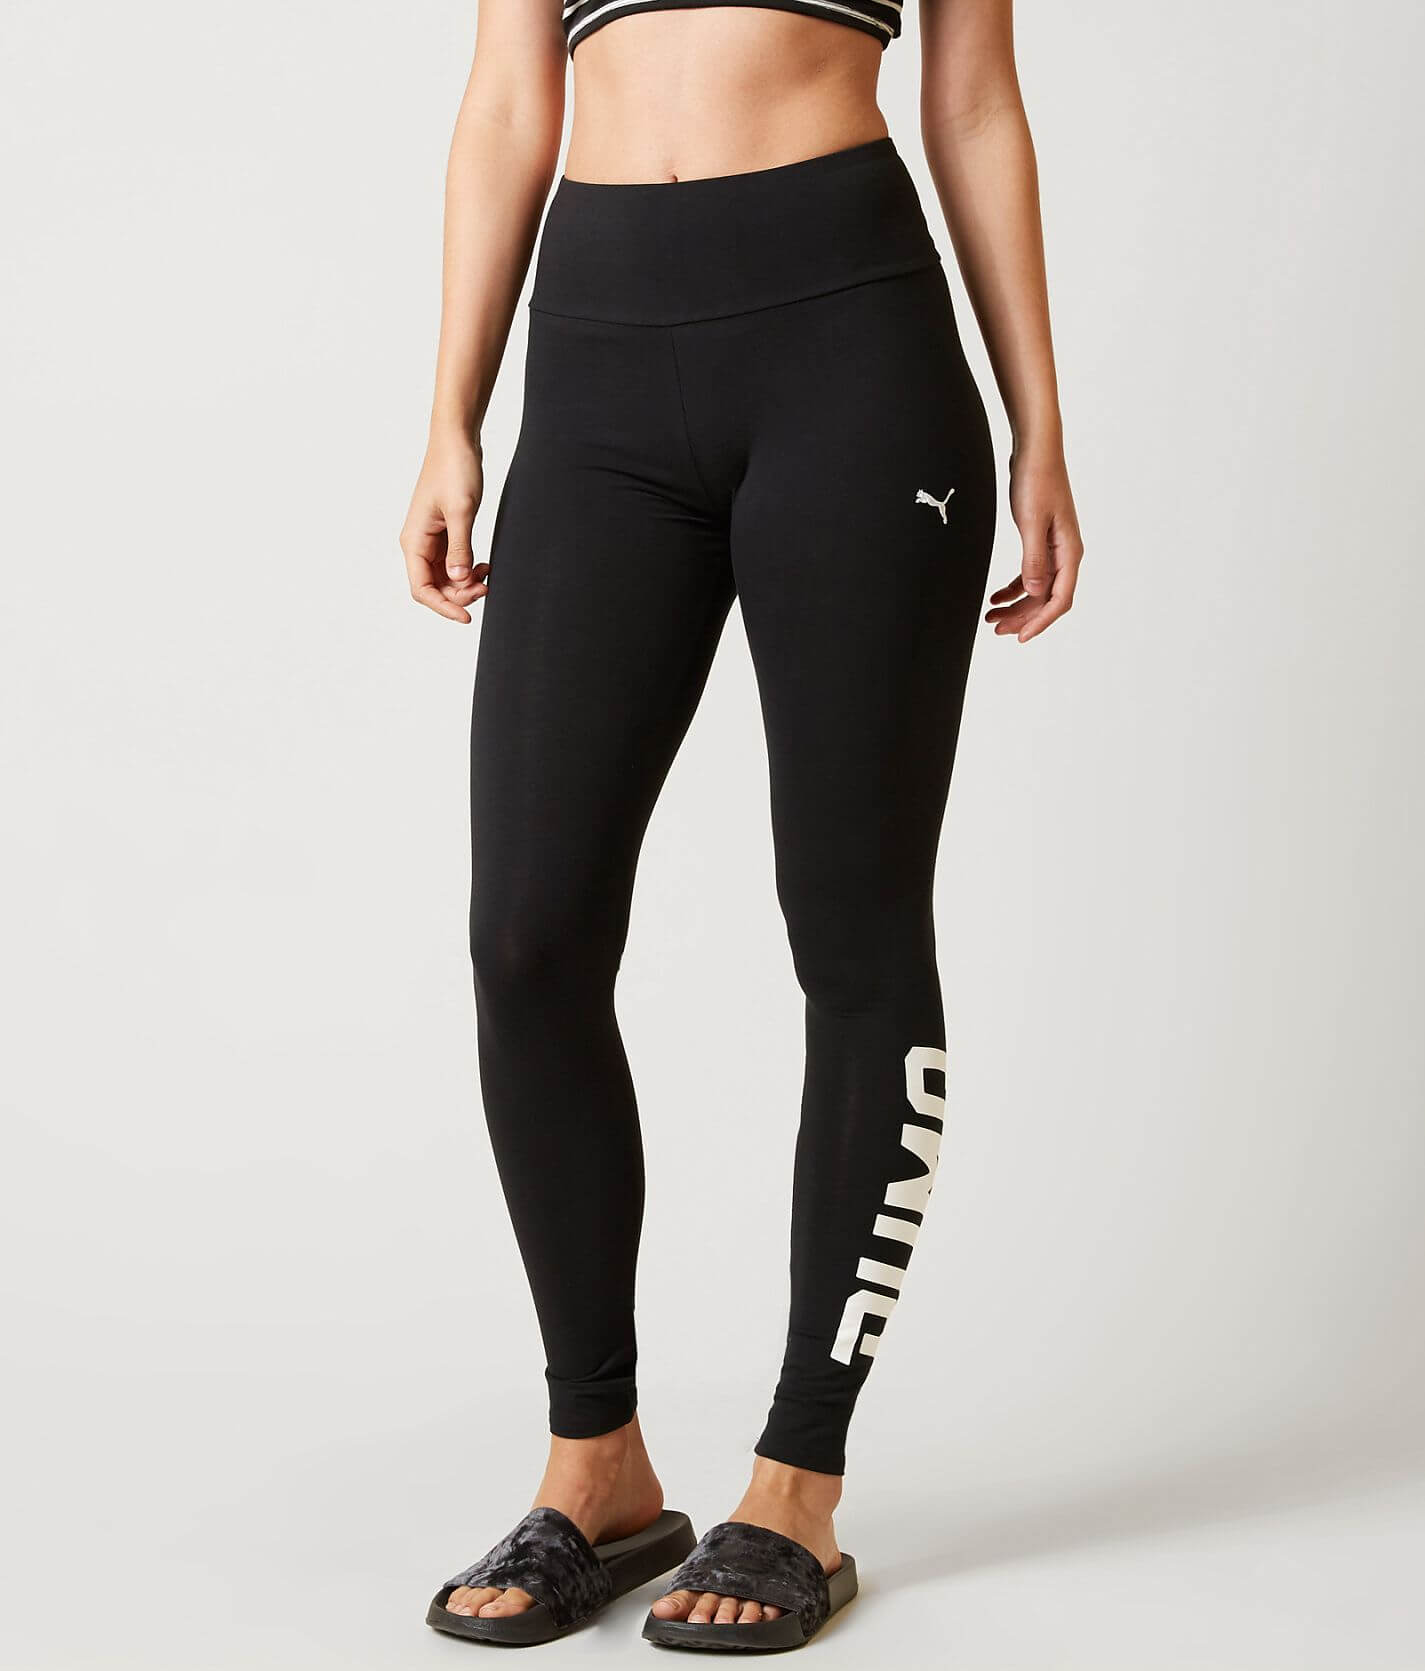 Puma Style Swagger Active Tights - Women's Leggings in Puma Black | Buckle